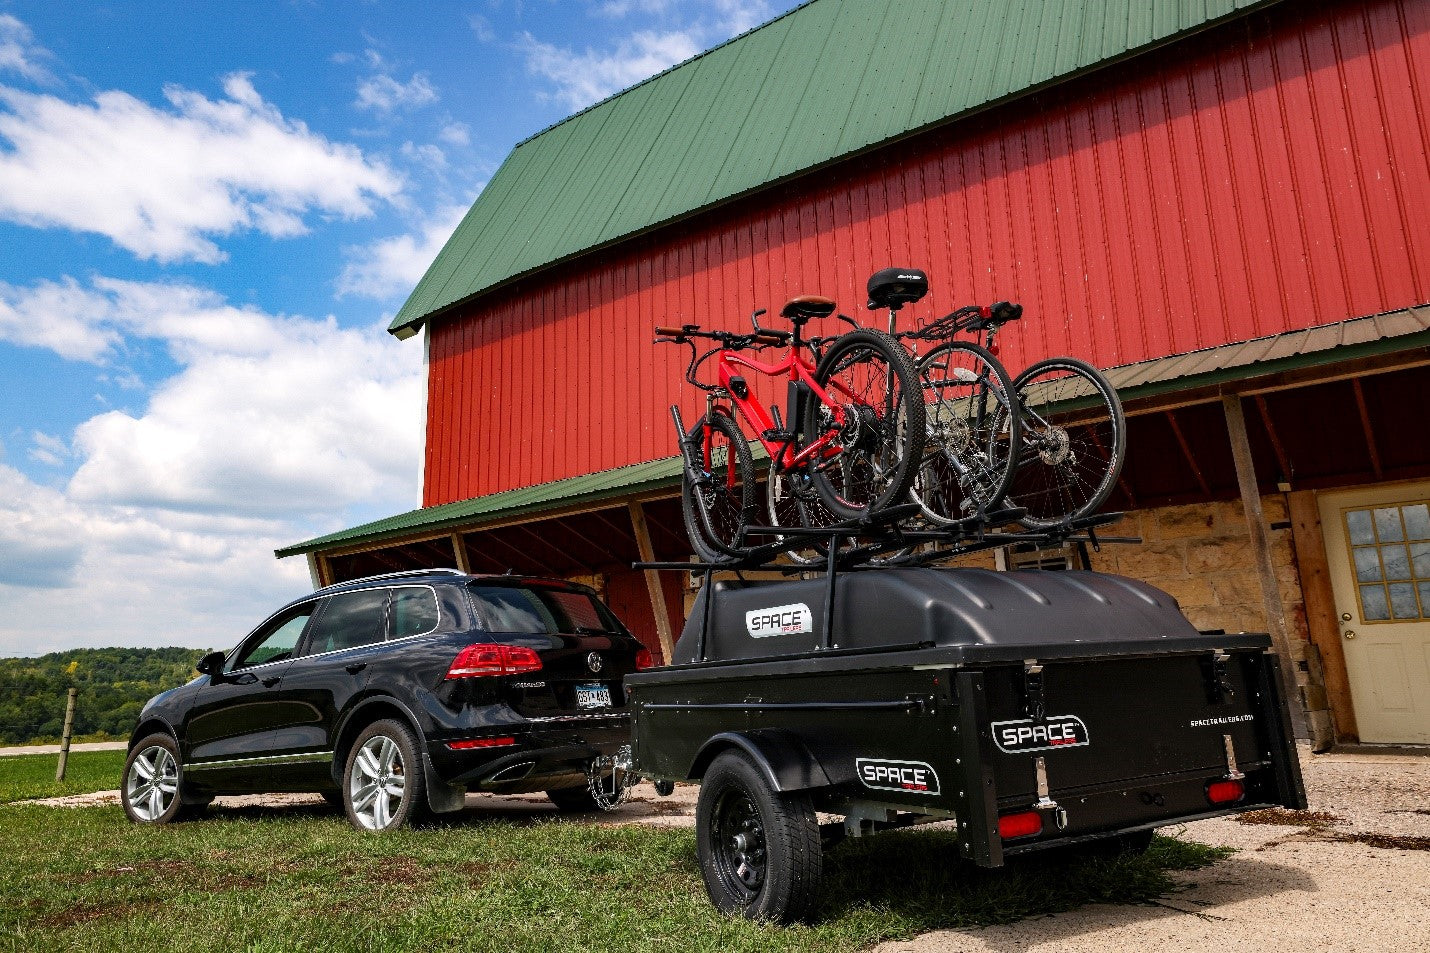 Image of a Space Trailer with a Bike Rack attached to an SUV